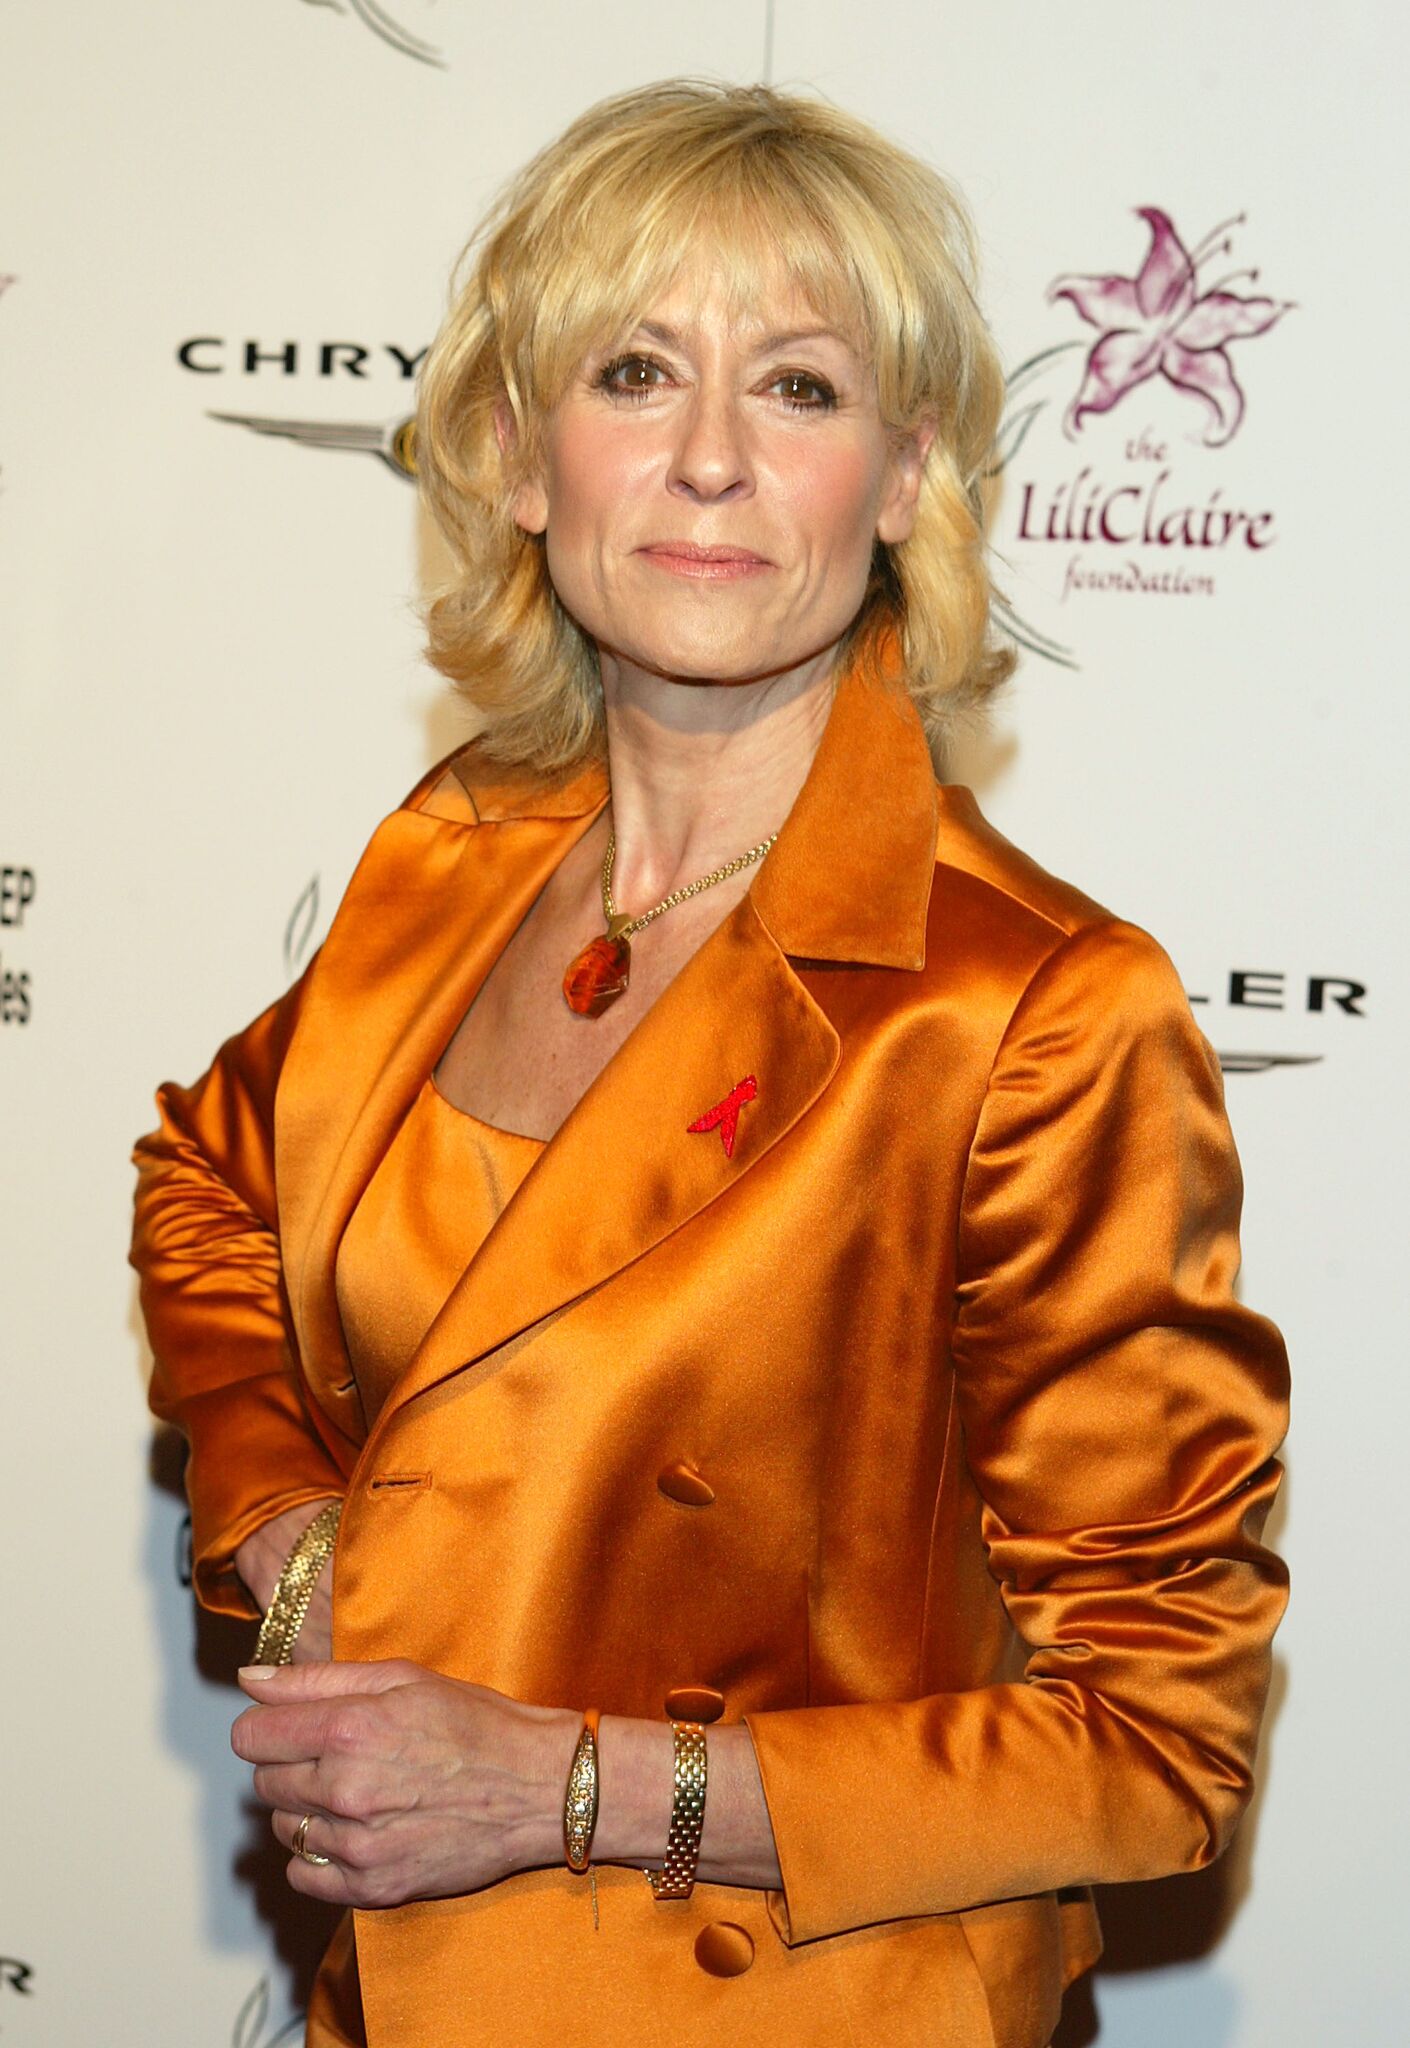 Judith Light arrives at The Lili Claire Foundation's 6th Annual Benefit at the Beverly Hilton Hotel | Getty Images